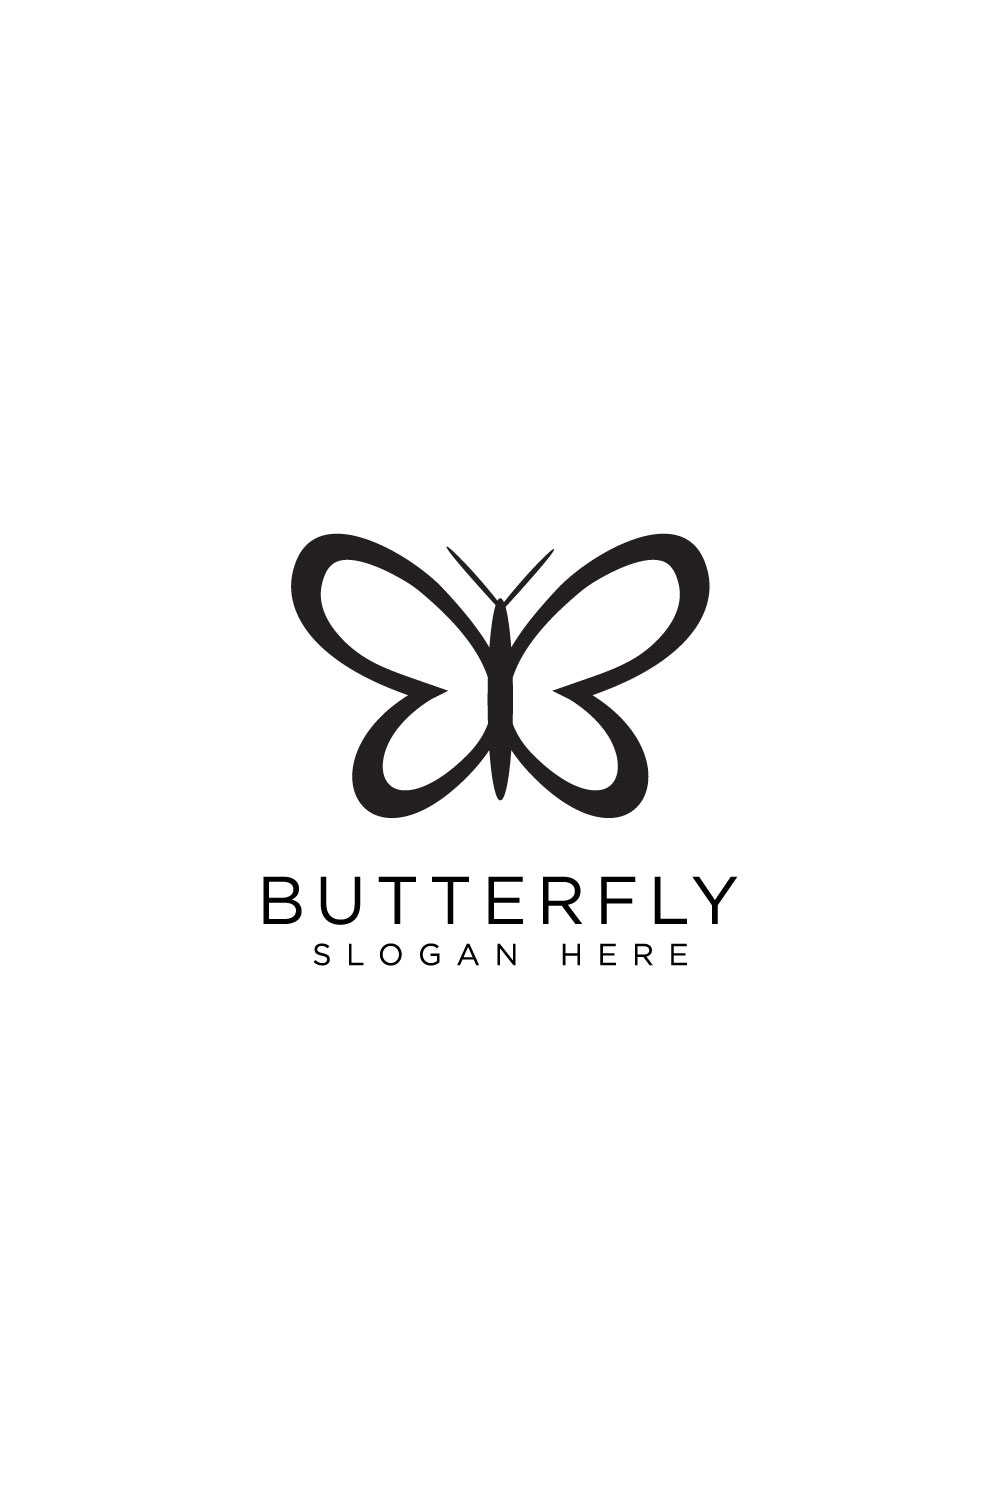 butterfly animal logo pinterest preview image.